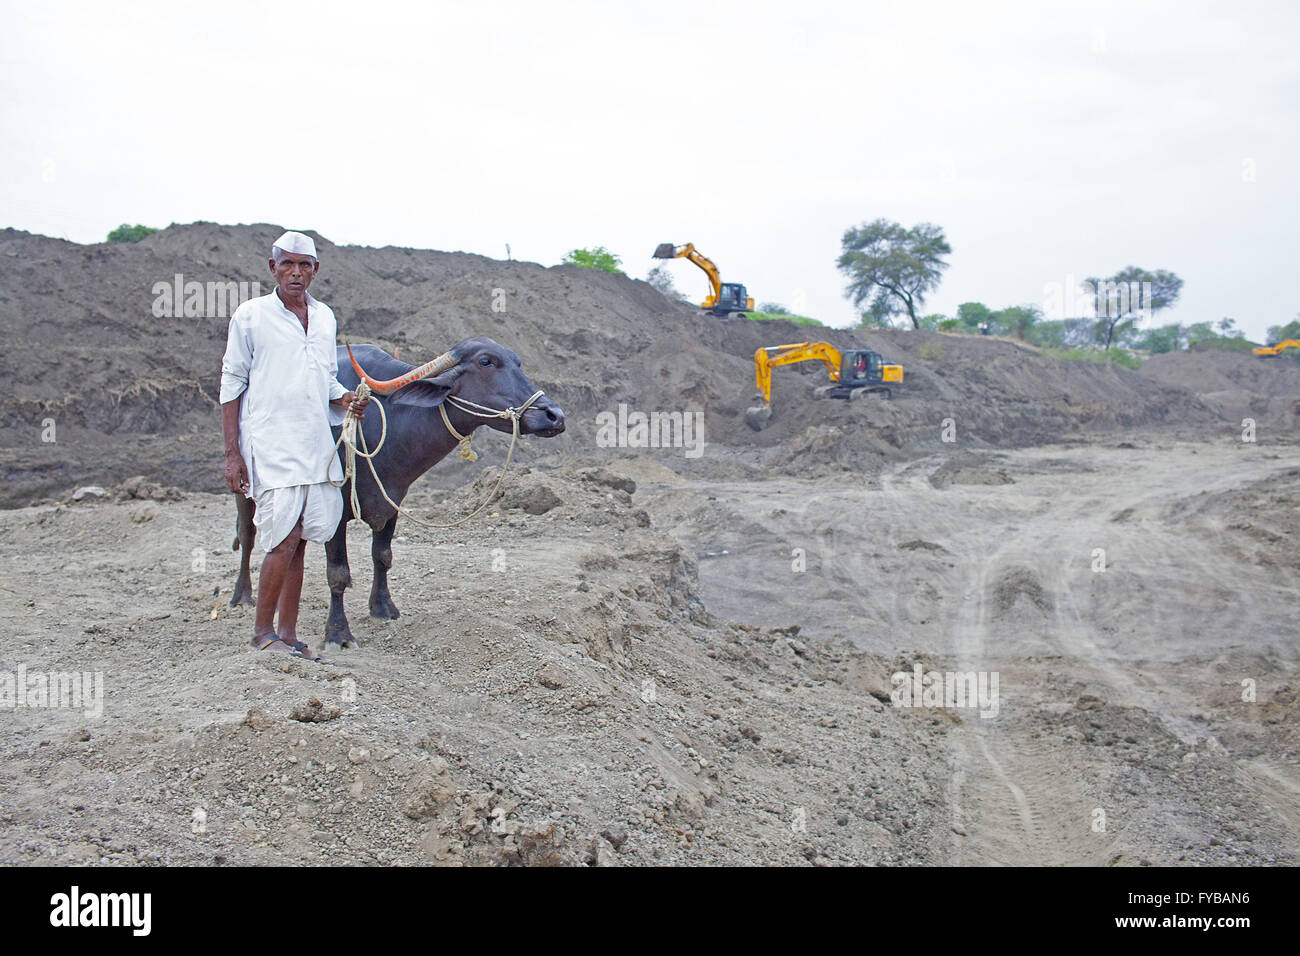 Latur, Maharashtra. 20th Apr, 2016. 20 April 2016 - Latur - INDIA.Farmer Balasahab Kale, 60, from Sai, outside of the town of Latur, with his buffalo.The administration has started widening & deepening the Sai river for water harvesting.Latur is part of the state's predominantly agricultural Marathwada region, where 273 farmers committed suicide between January and March this year.The area is among the worst affected by the drought and some families in Latur have left for cities such as the state capital Mumbai, nearly 500 kilometres away. In Latur town, there are huge queues at water s Stock Photo